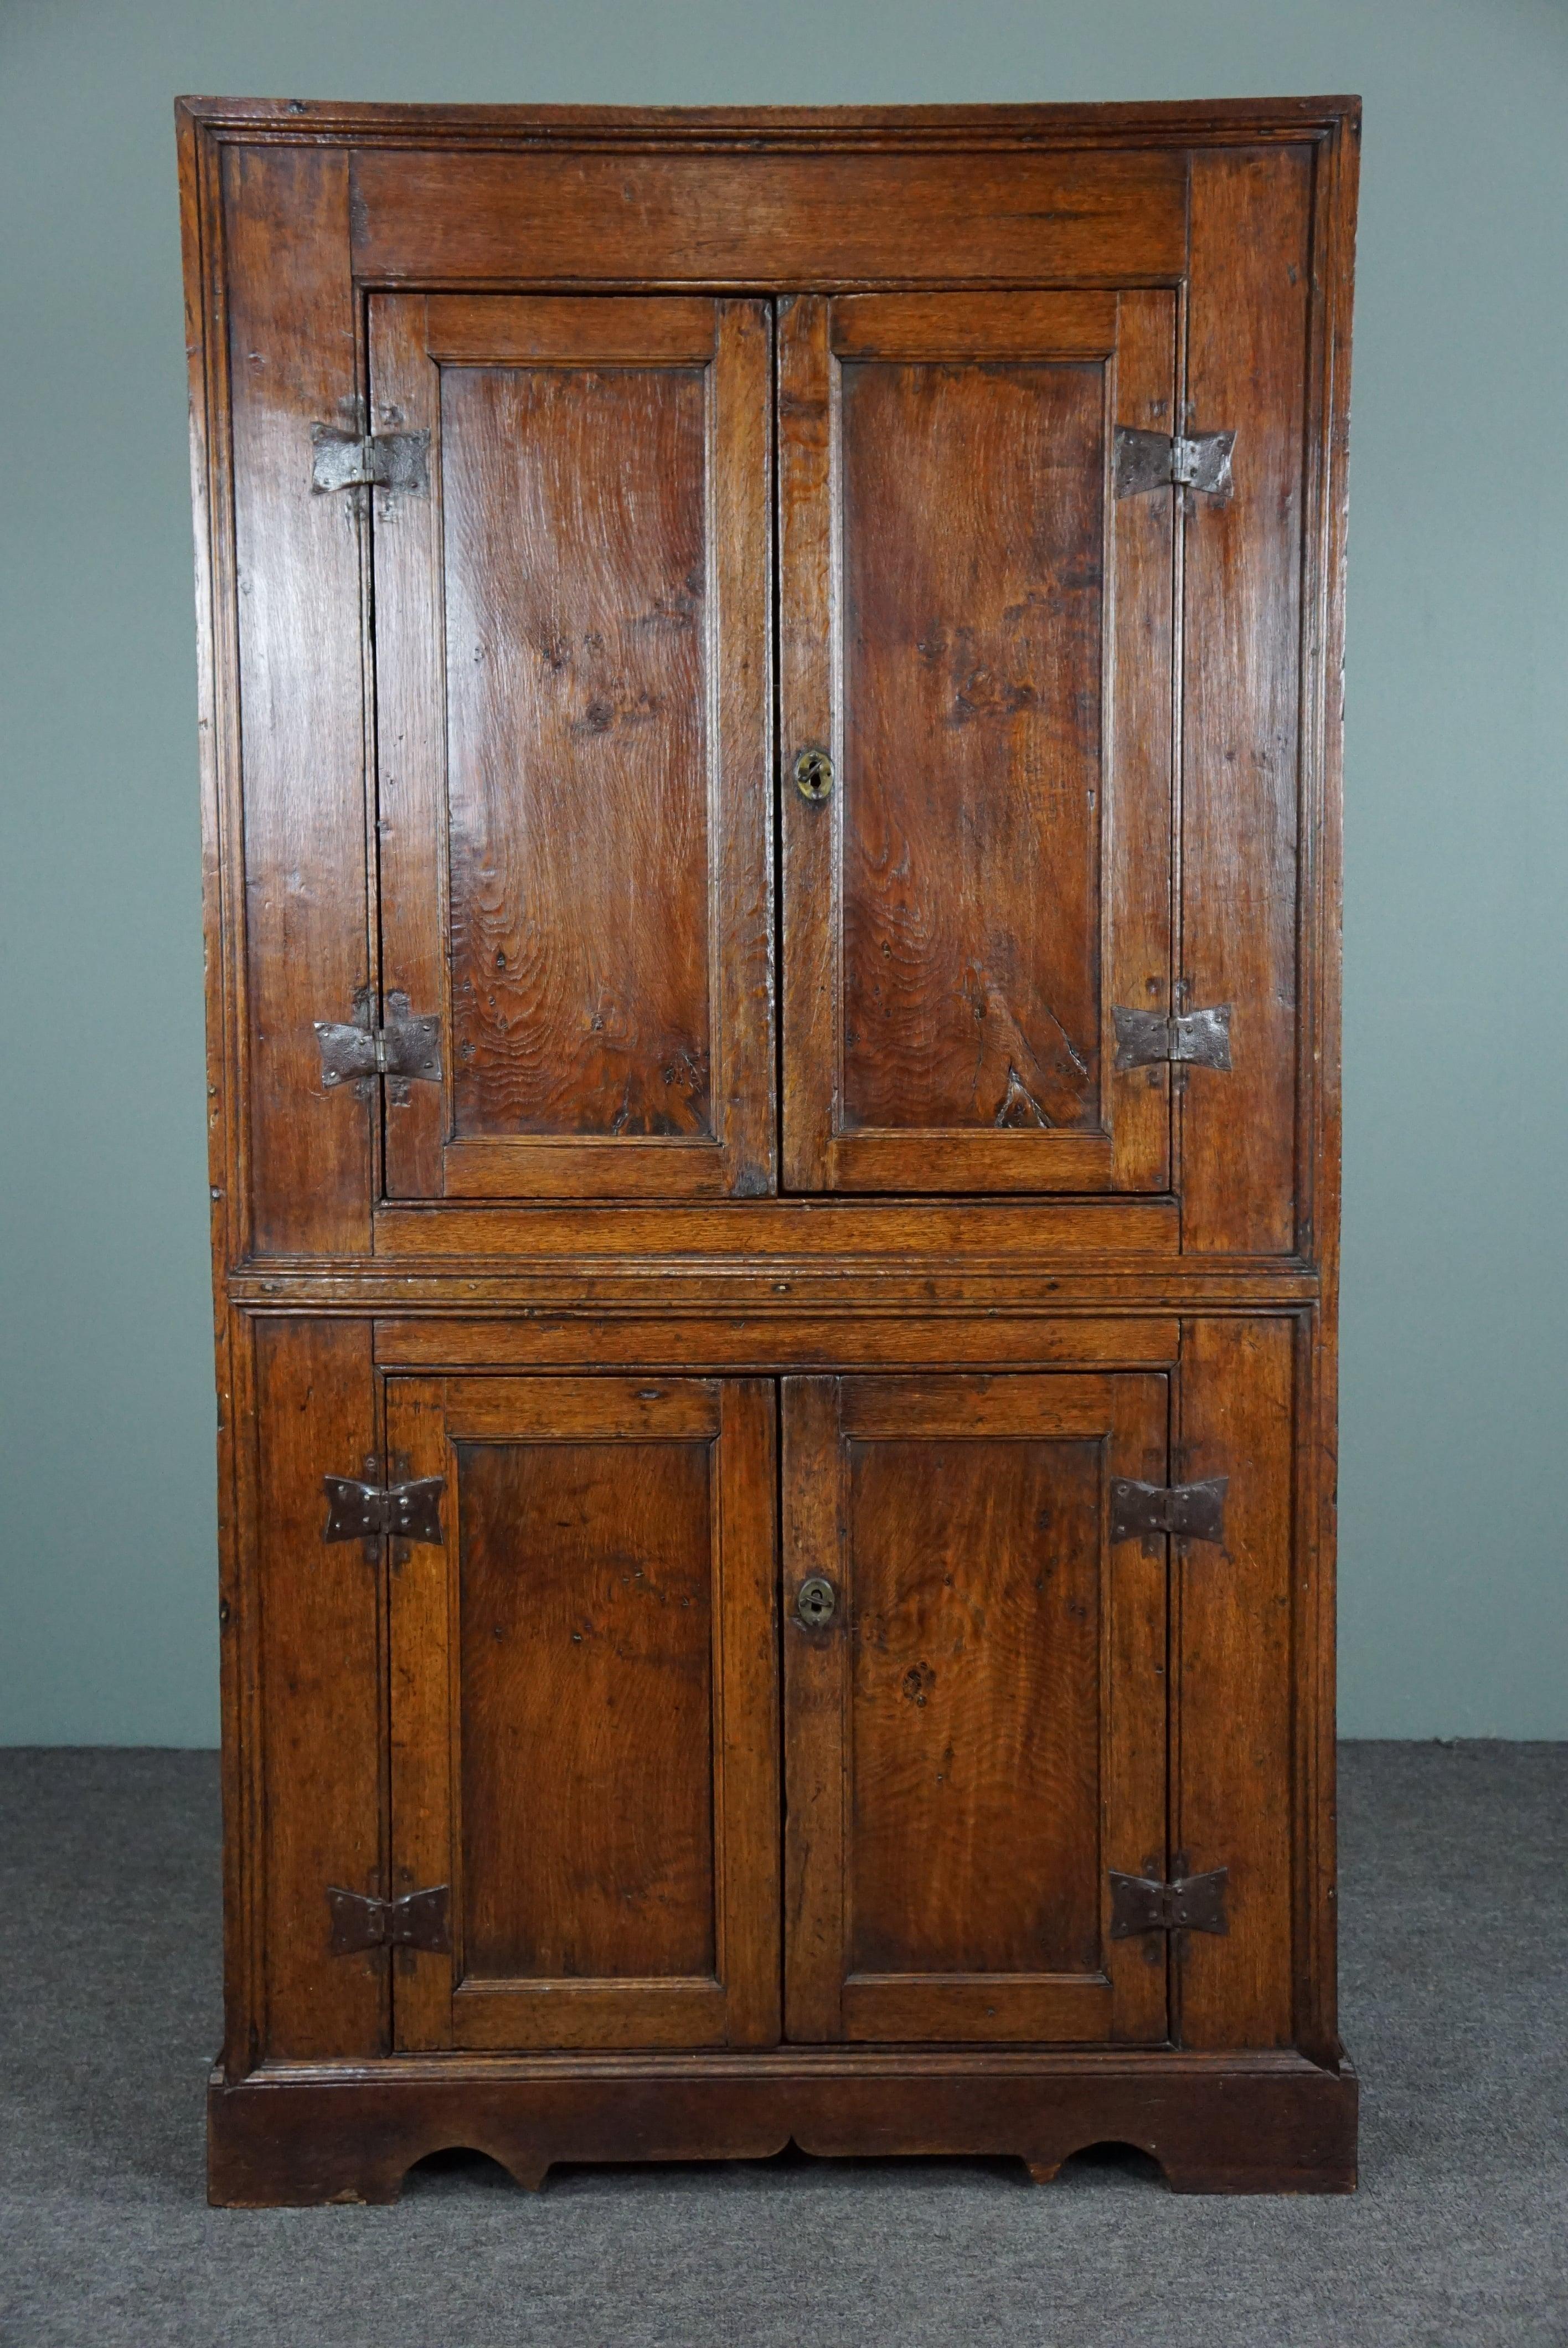 Offered is this beautiful and very practical 4-door cabinet dating from the early to mid-18th century.

This wonderfully beautiful piece of furniture wears its age with pride and has more than stood the test of time.
Whether it shows itself in a